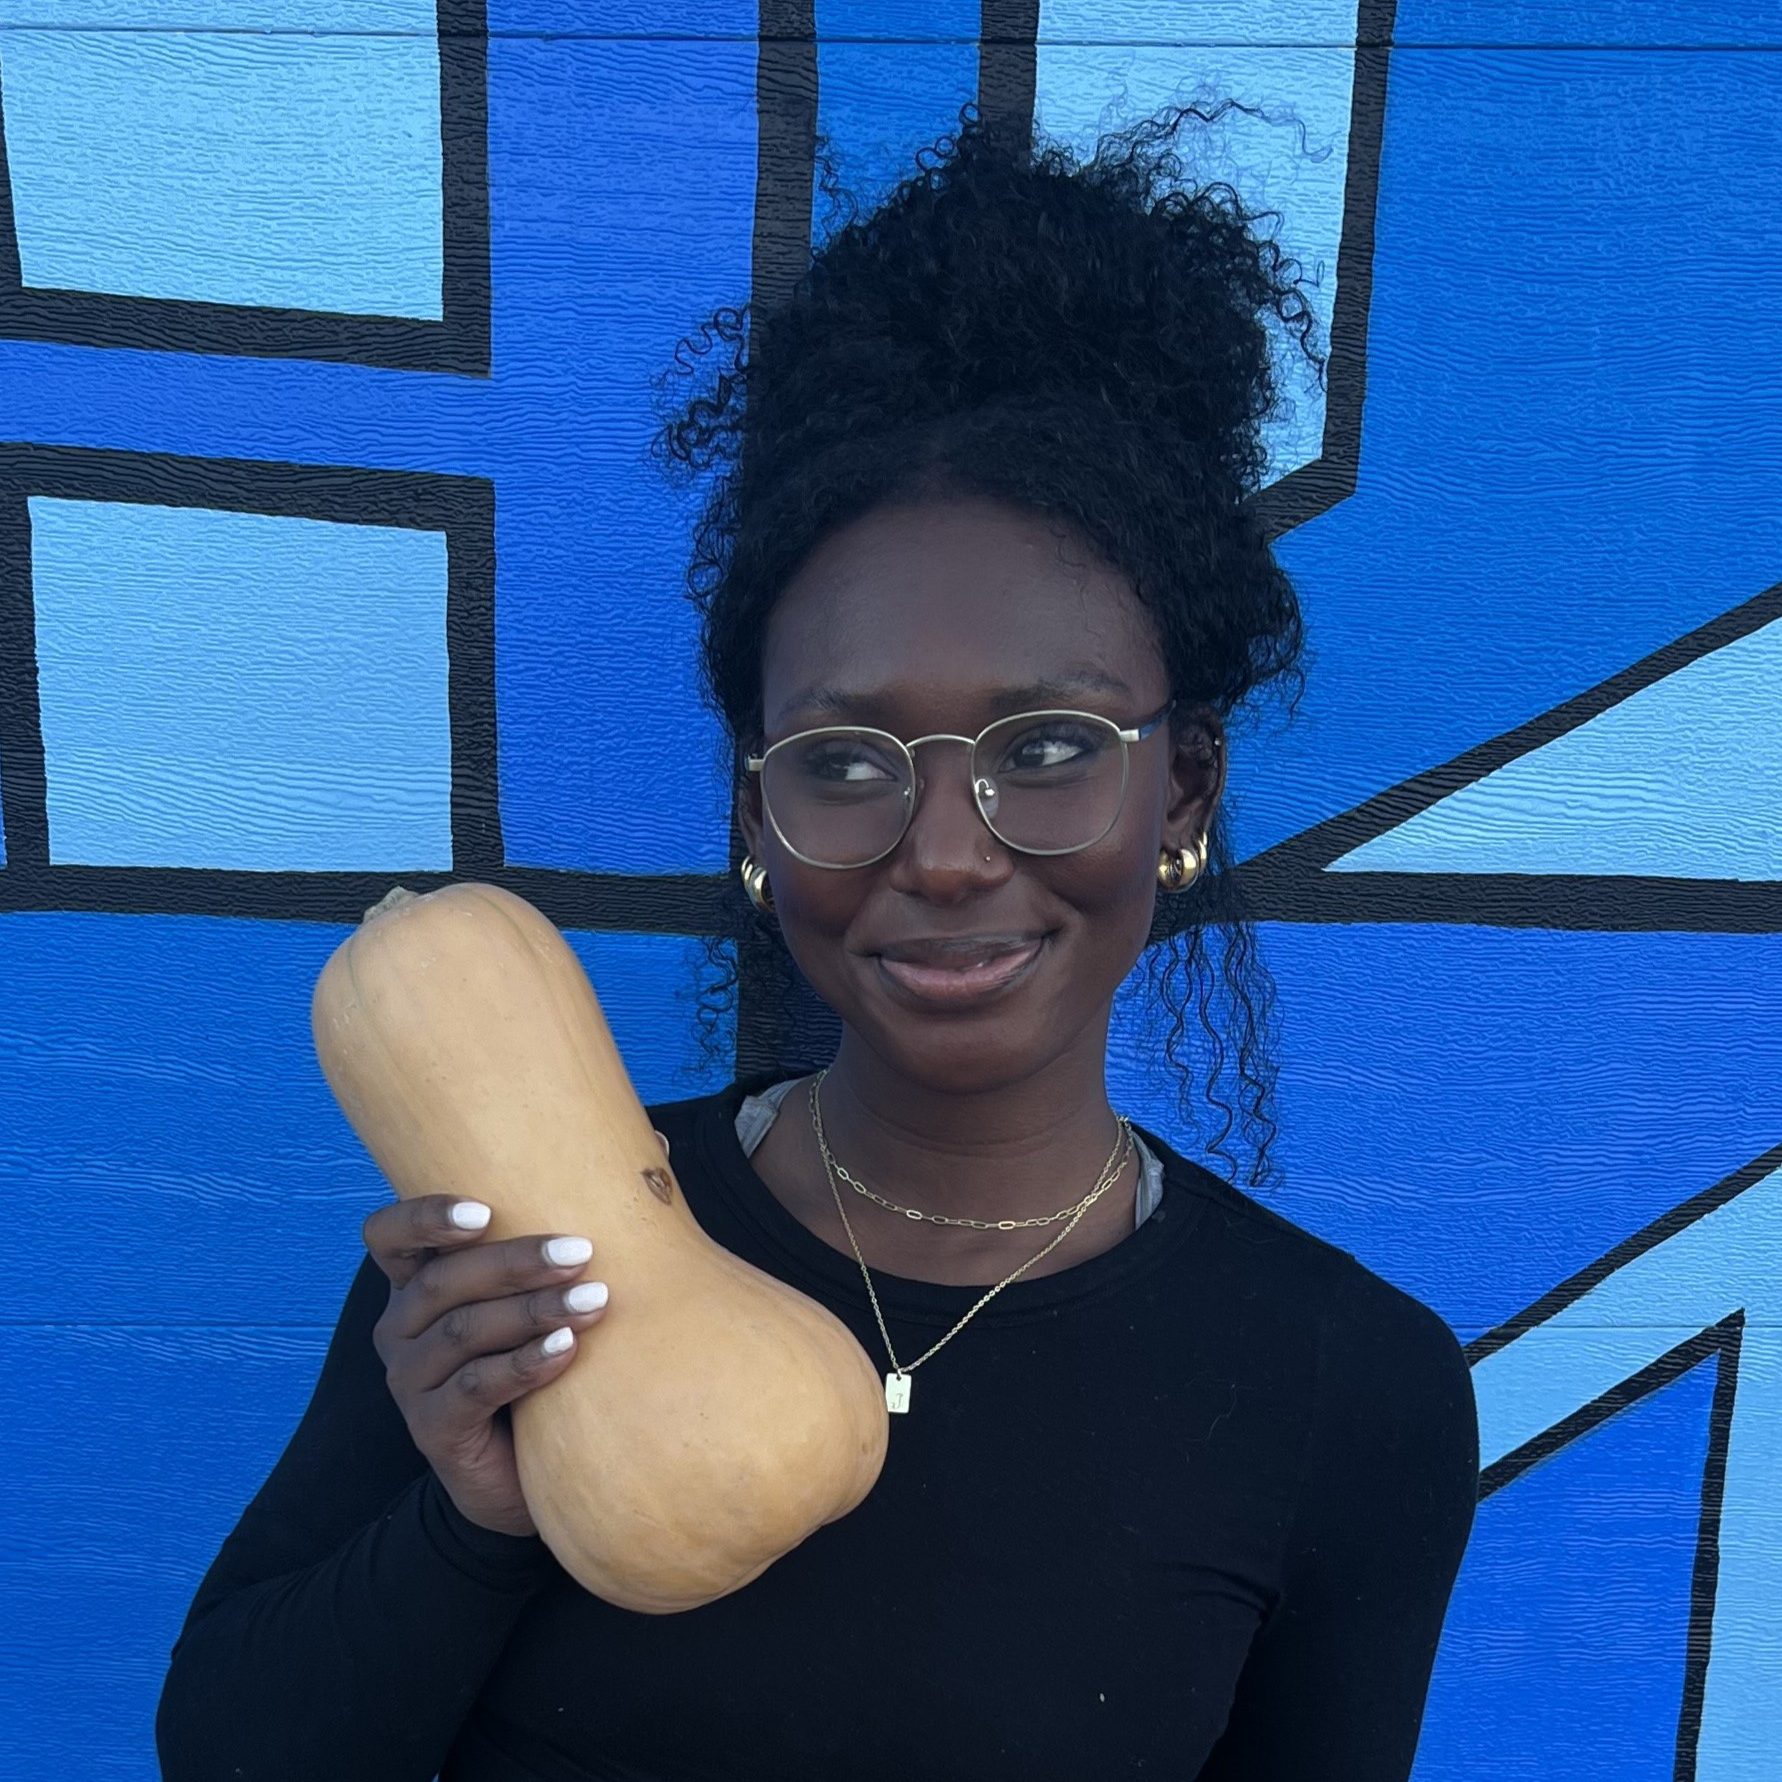 Jada stands against a blue wall and holds a winter squash in her hand.